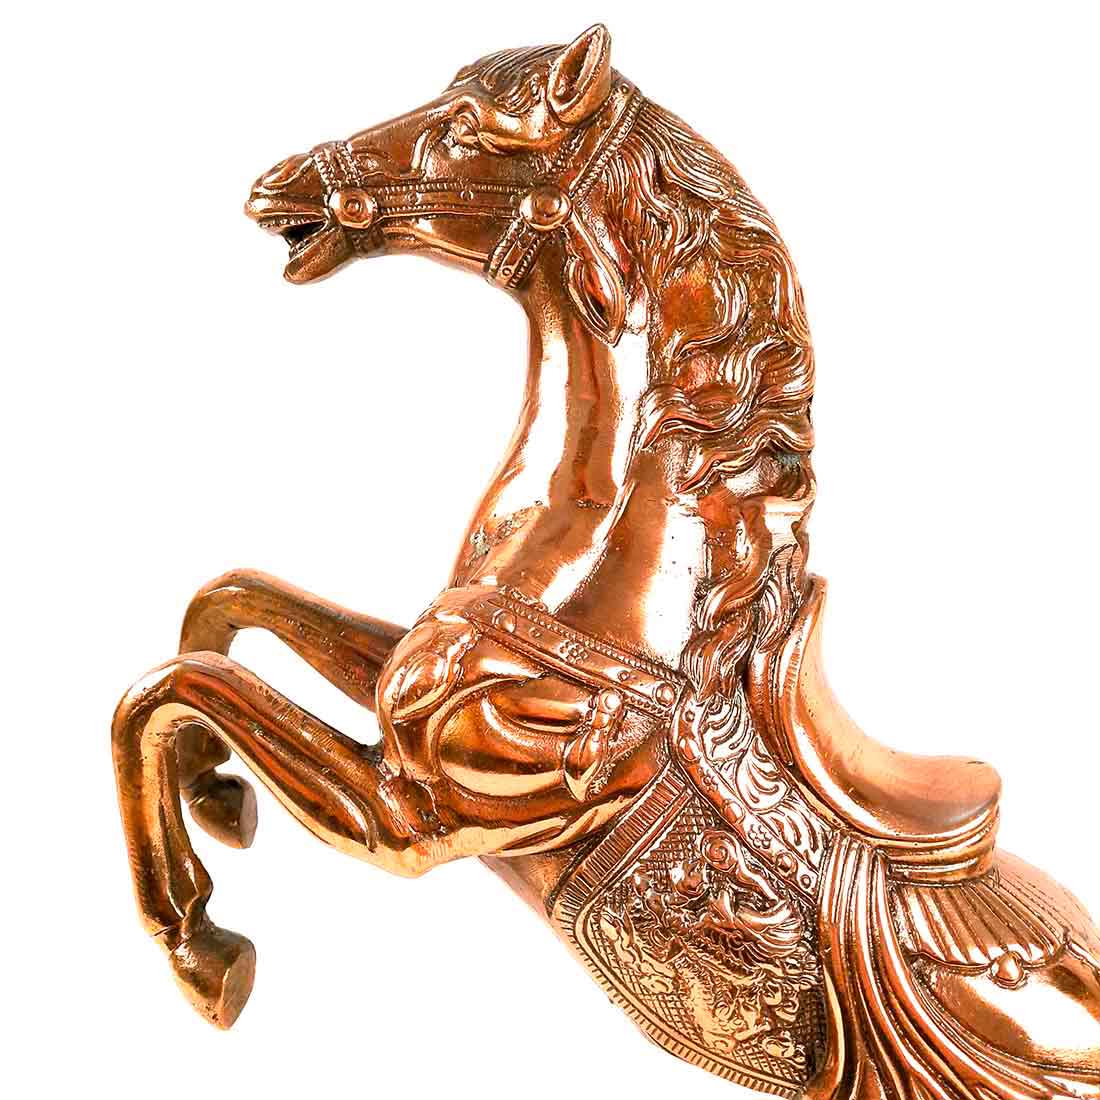 Galloping Horse Figurine - Antique Showpiece - For Table Decor & Gifts - 18 Inch